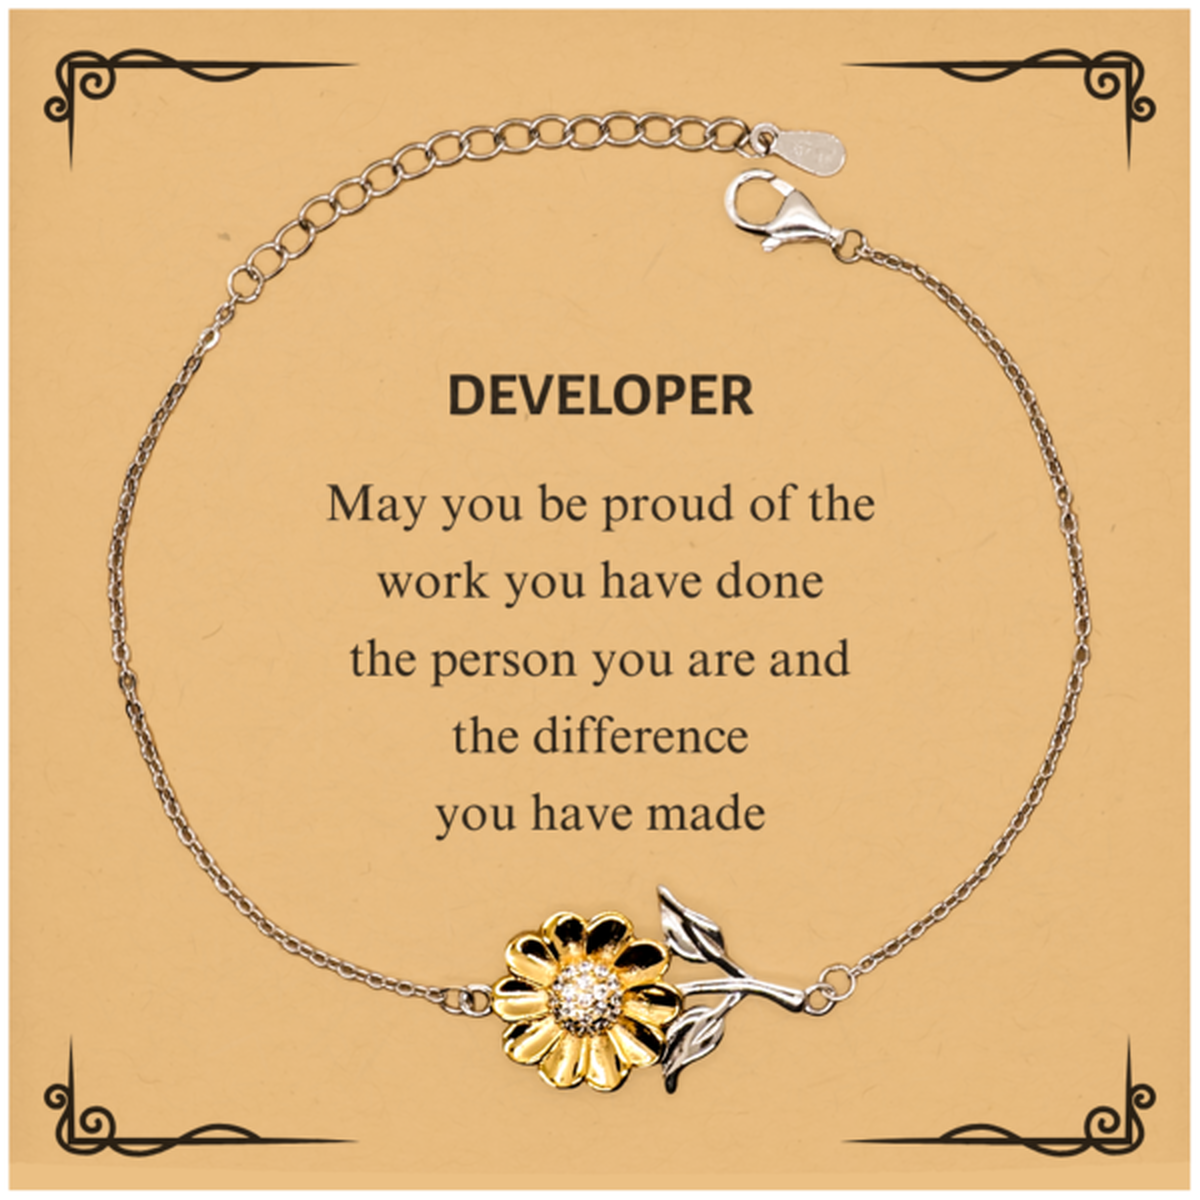 Developer May you be proud of the work you have done, Retirement Developer Sunflower Bracelet for Colleague Appreciation Gifts Amazing for Developer